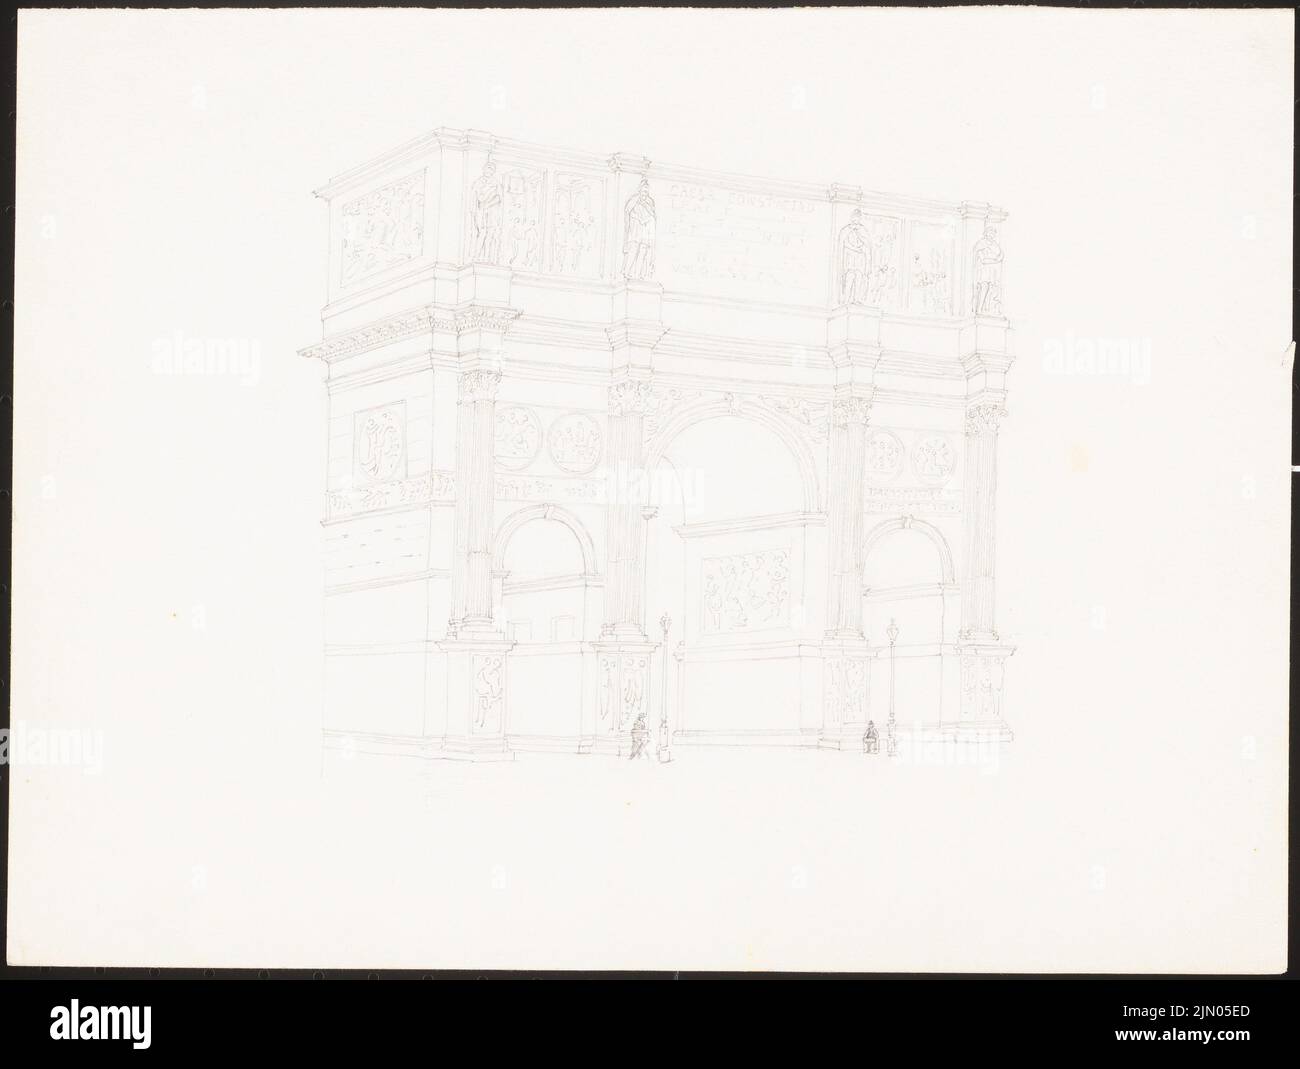 Klomp Johannes Franziskus (1865-1946), unaffected drawings and travel sketches (0-0): Perspective view of the Constantine arch, Rome. Pencil on paper, 25 x 33.2 cm (including scan edges) Klomp Johannes Franziskus  (1865-1946): Unzugeordnete Zeichnungen und Reiseskizzen Stock Photo